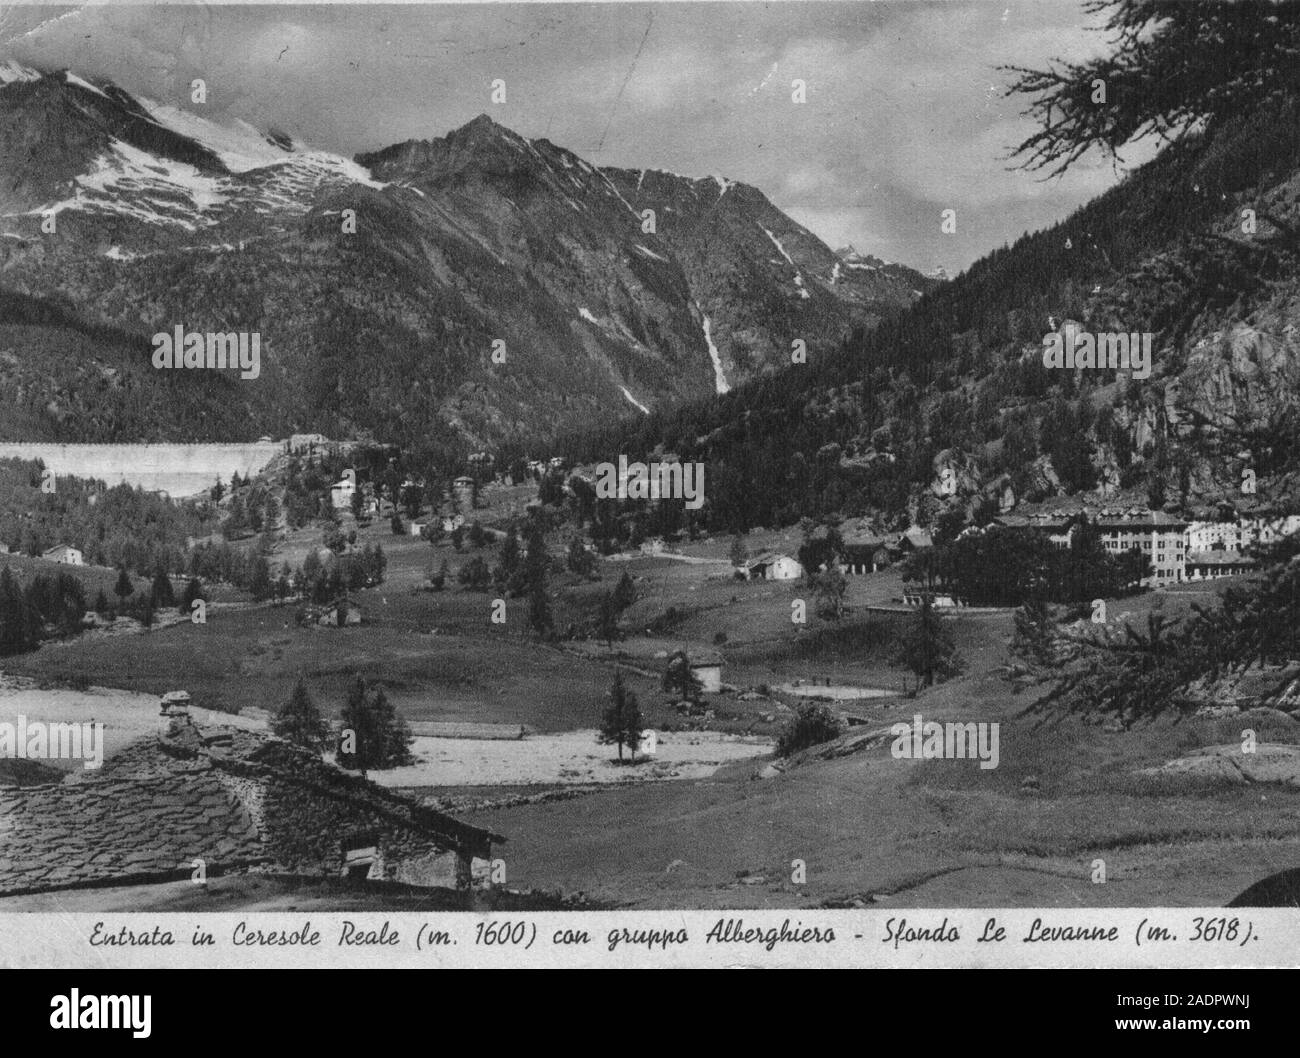 Postalcard of Ceresole Reale (National Park), Piedmont, Italy, 1937. Stock Photo